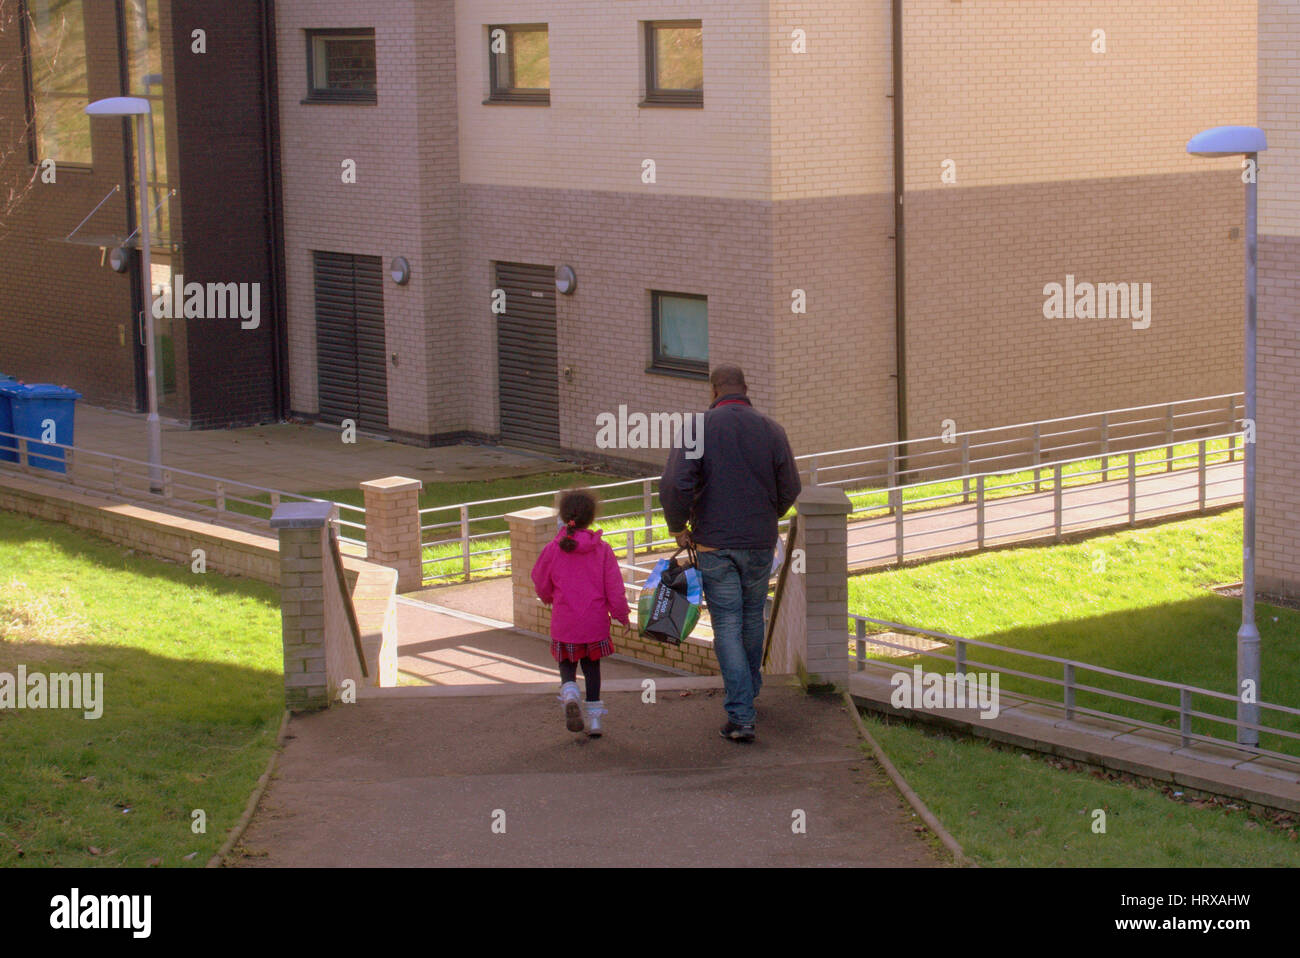 council estate ethnic father and daughter Stock Photo